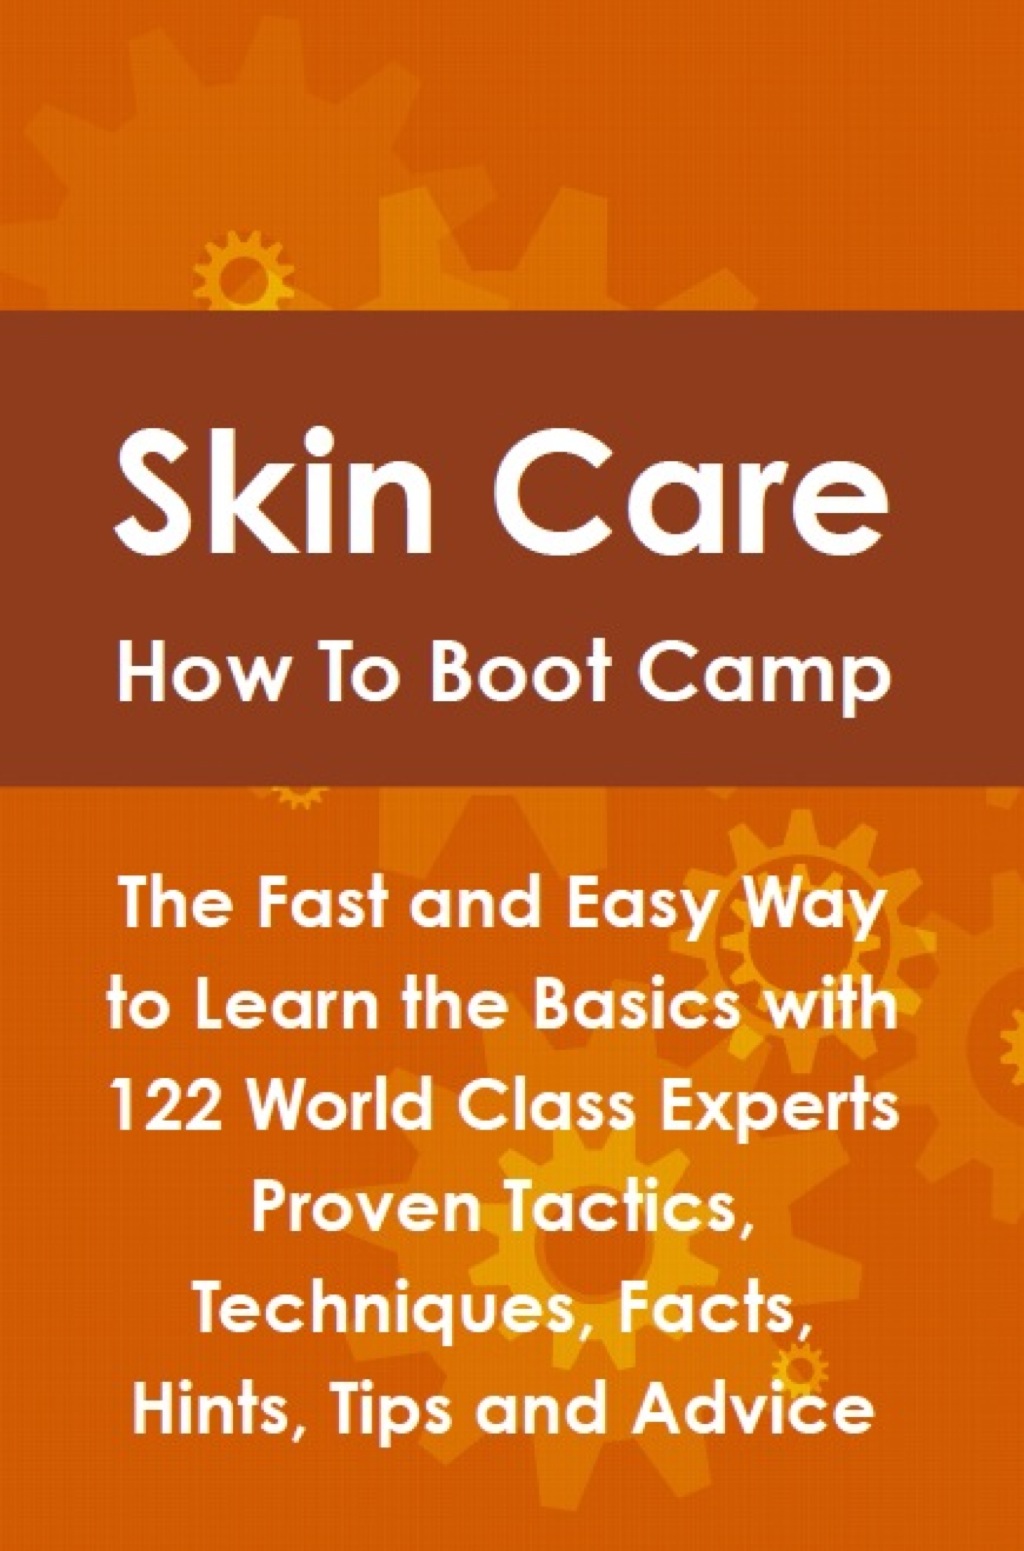 Skin Care How To Boot Camp: The Fast and Easy Way to Learn the Basics with 122 World Class Experts Proven Tactics  Techni (eBook) - Lance Glackin,